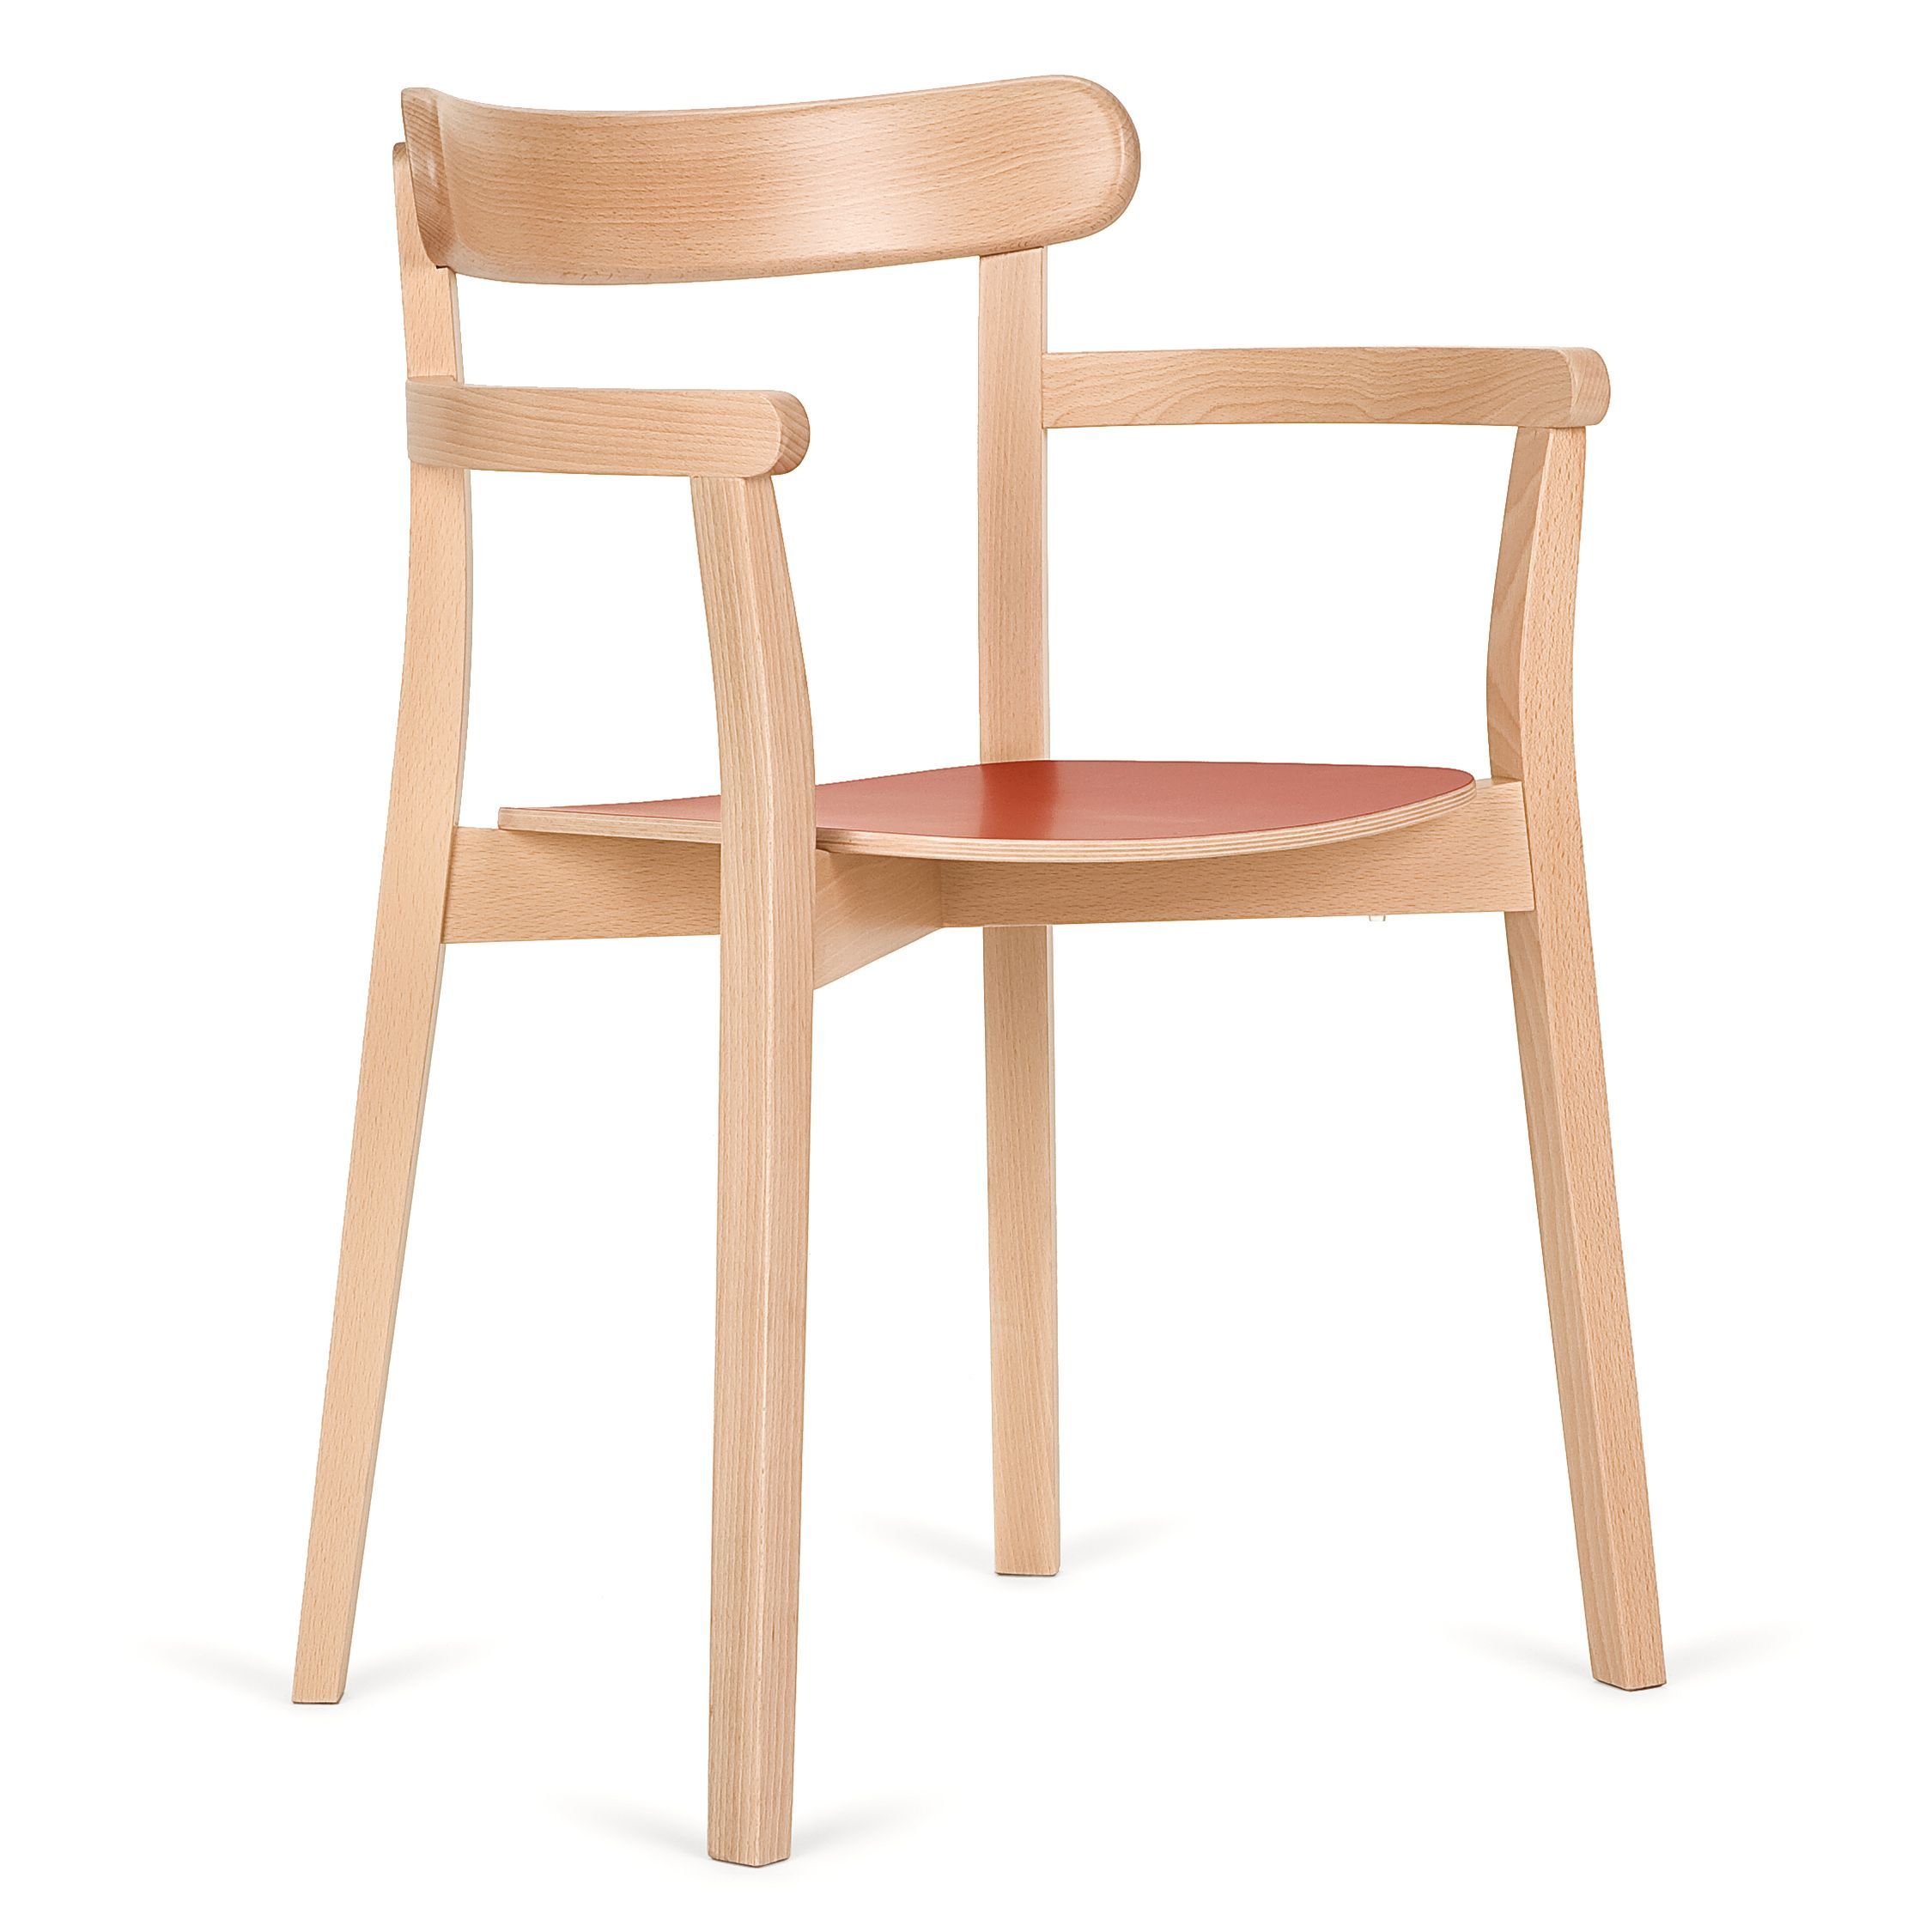 Chair B-4420 ICHO by Paged